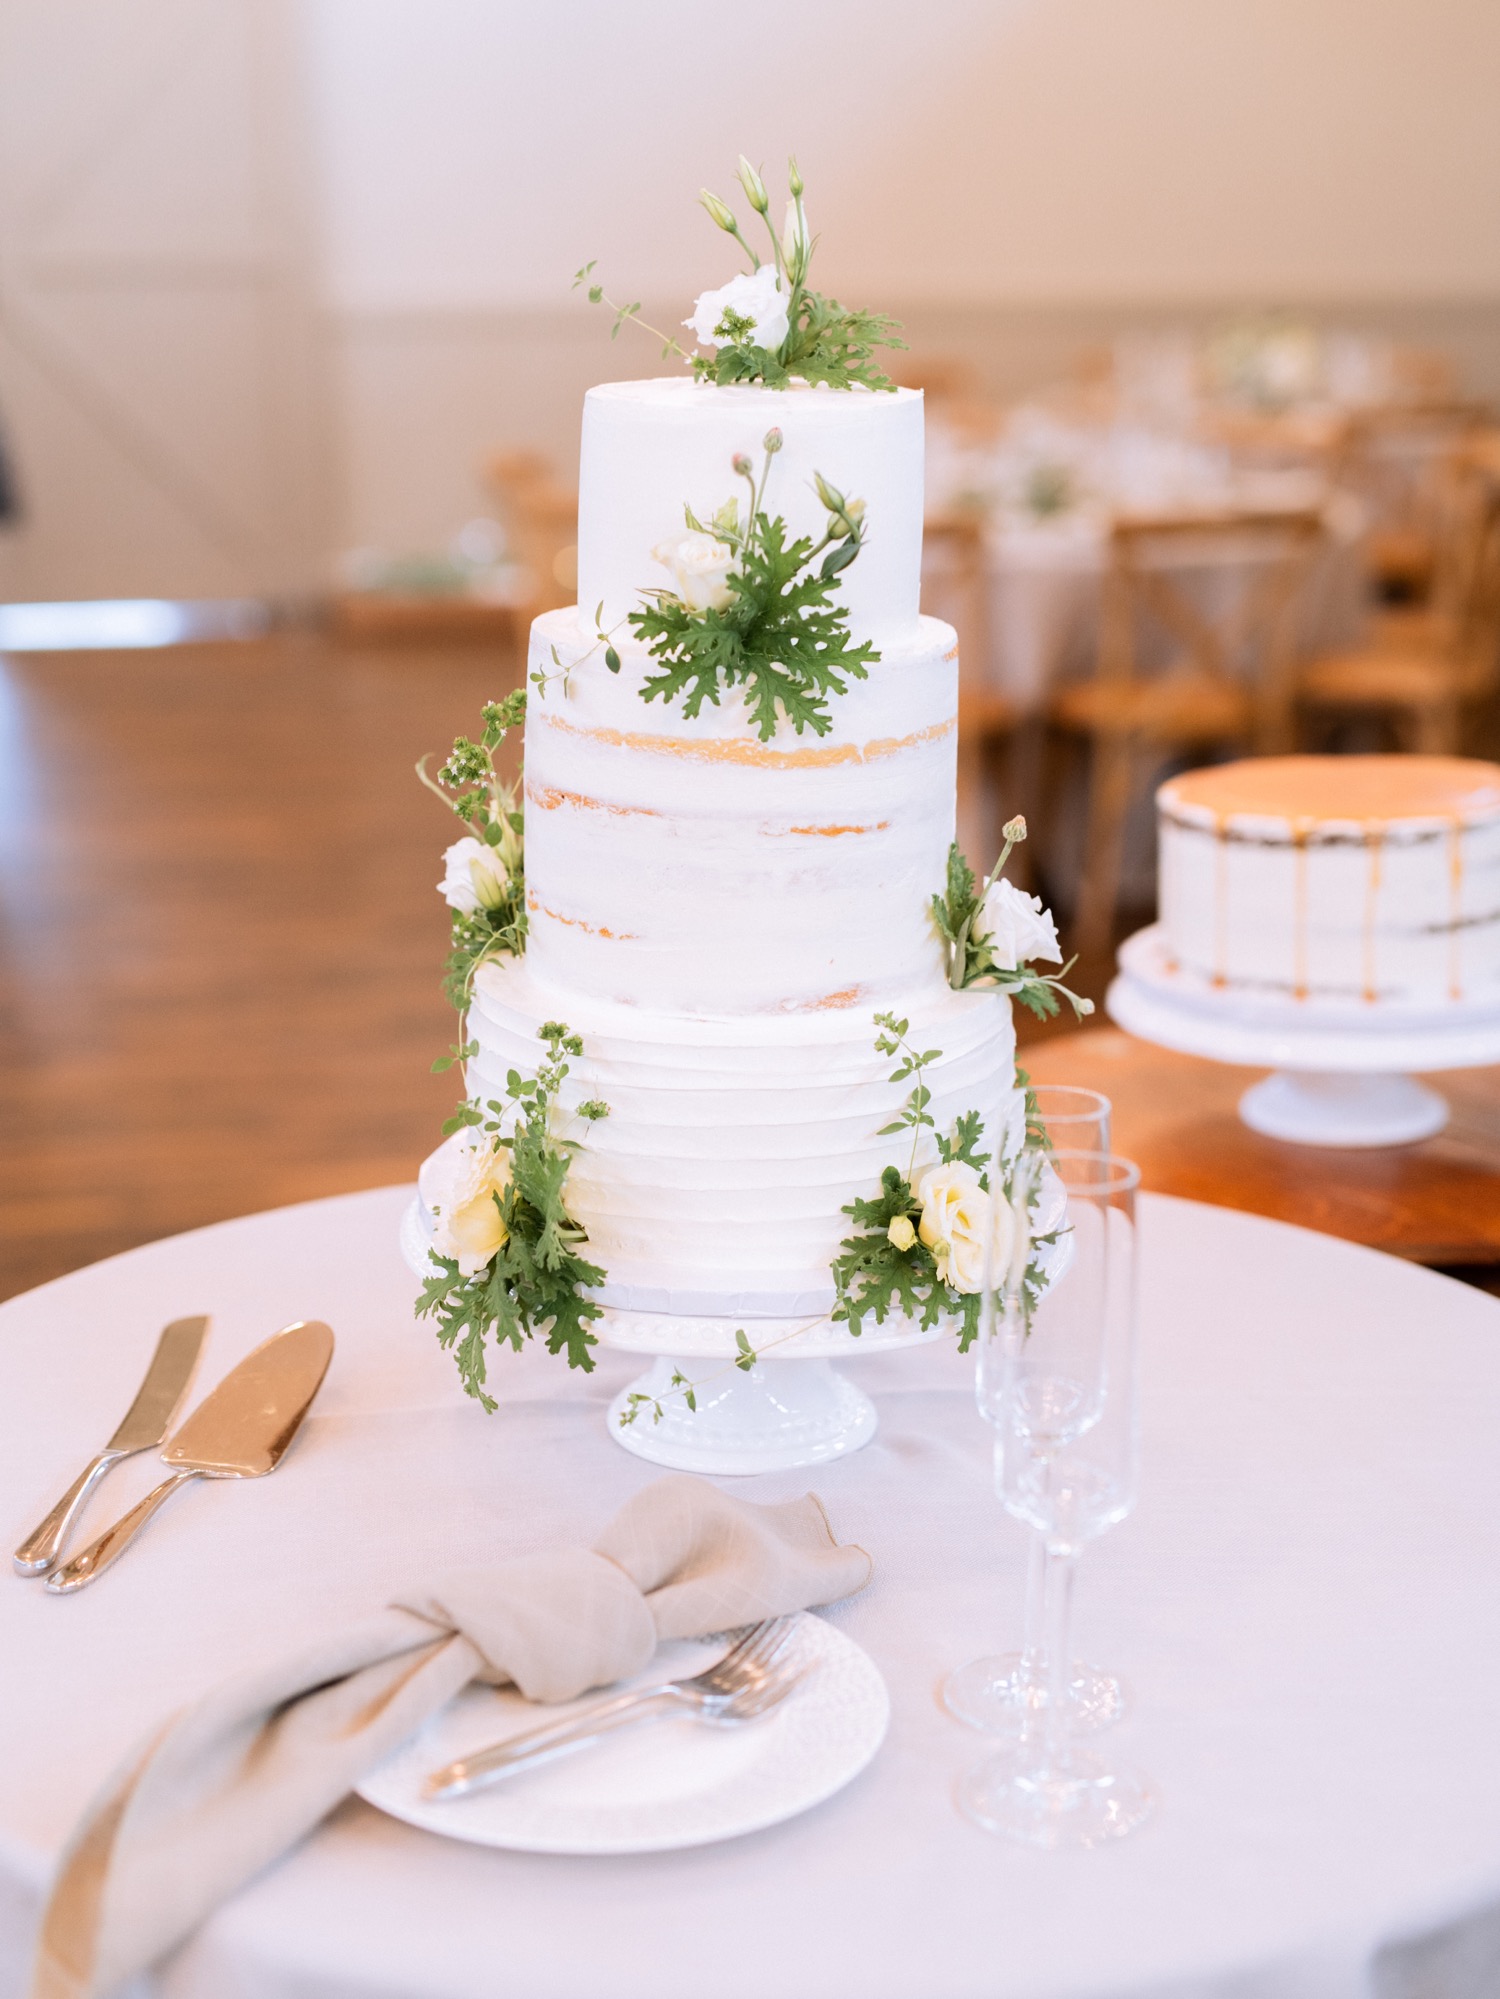 3 tiered white cake with white and green floral arrangements as decoration